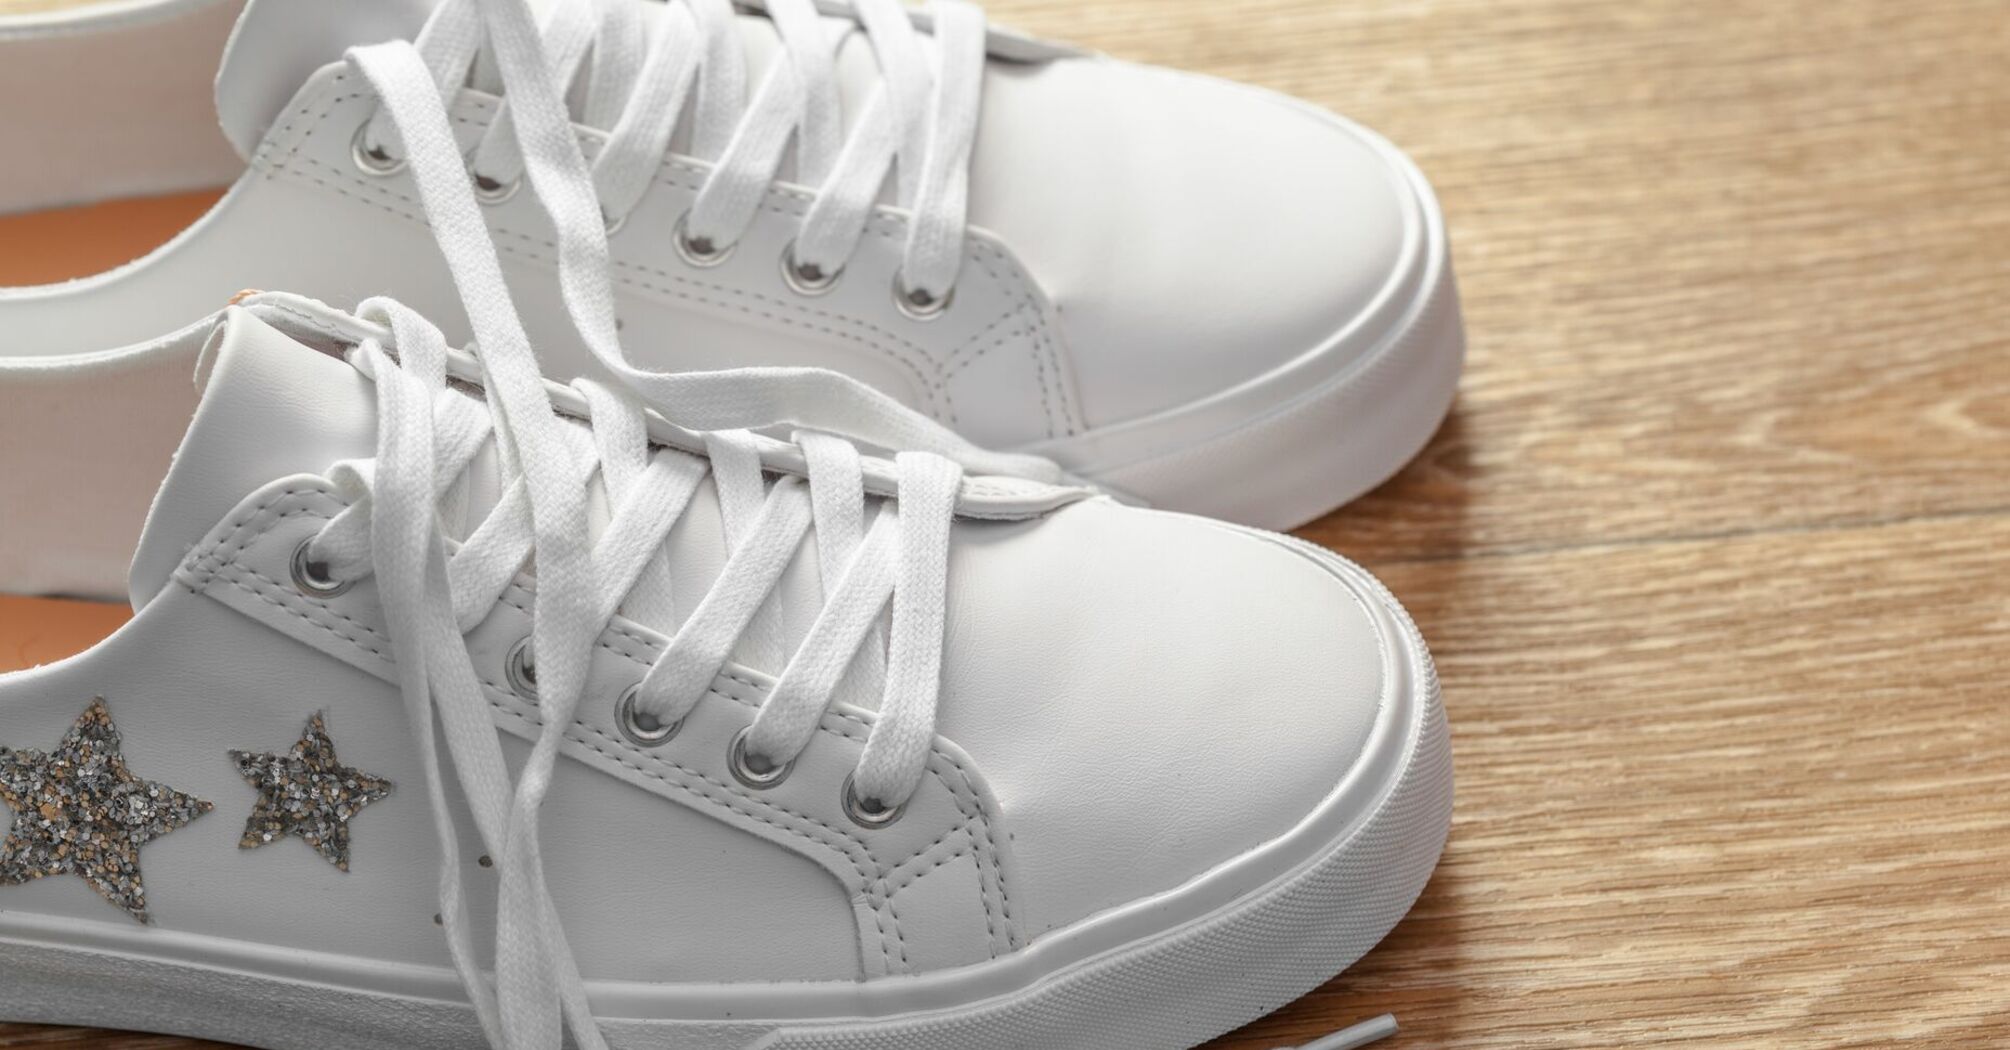 How to bring white sneakers back to normal